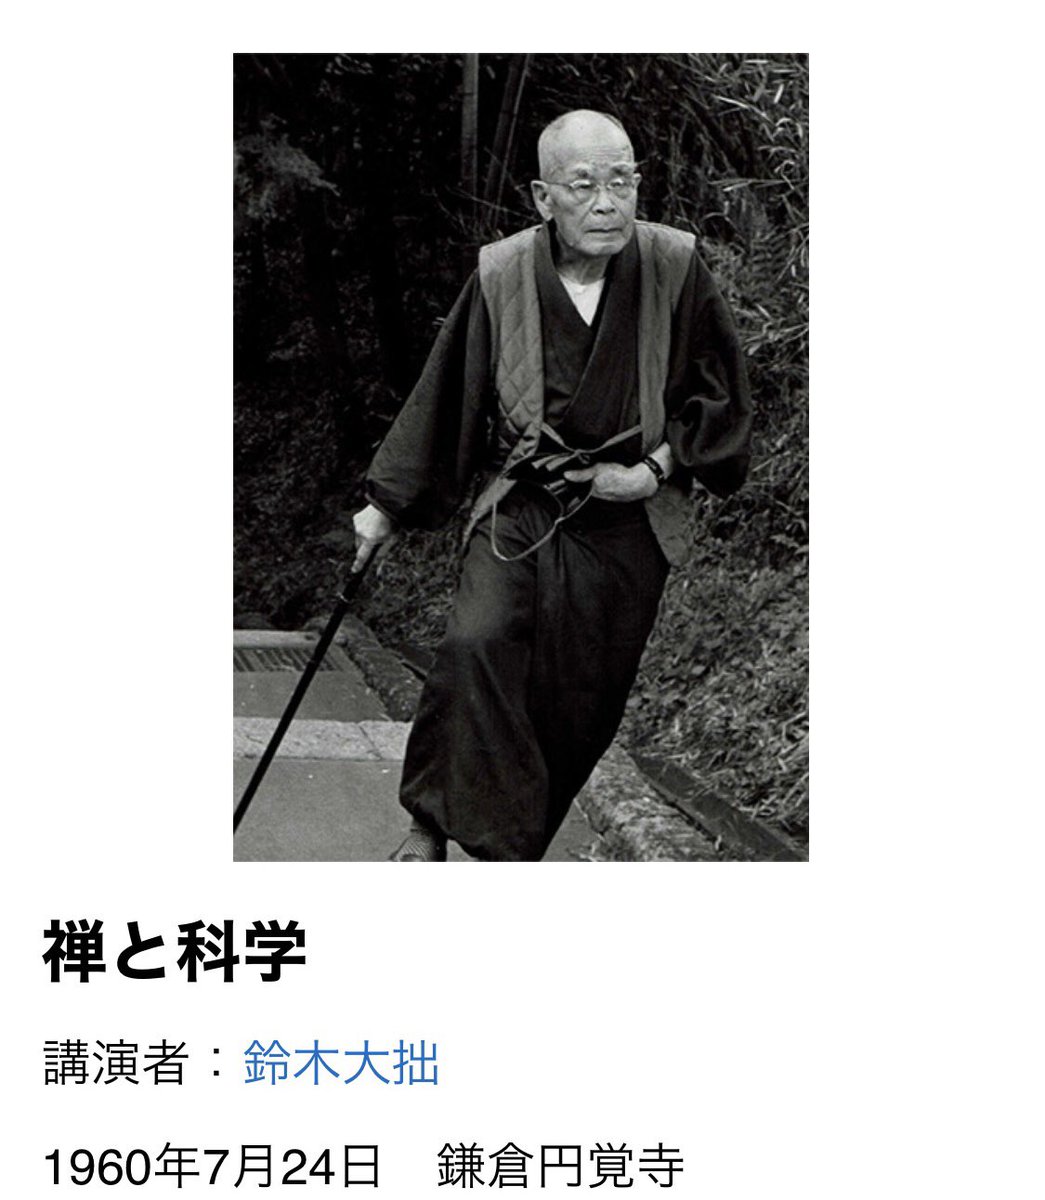 The spirit of the Japanese samurai is very much related to the soul of the Japanese earth.
He has keen insight into the roots of Japan. He is a very talented man.

If you are interested in Japanese #Zen please visit his memorial museum.

https://t.co/YVXC0YVMAi https://t.co/ZQd8DlT2fO 